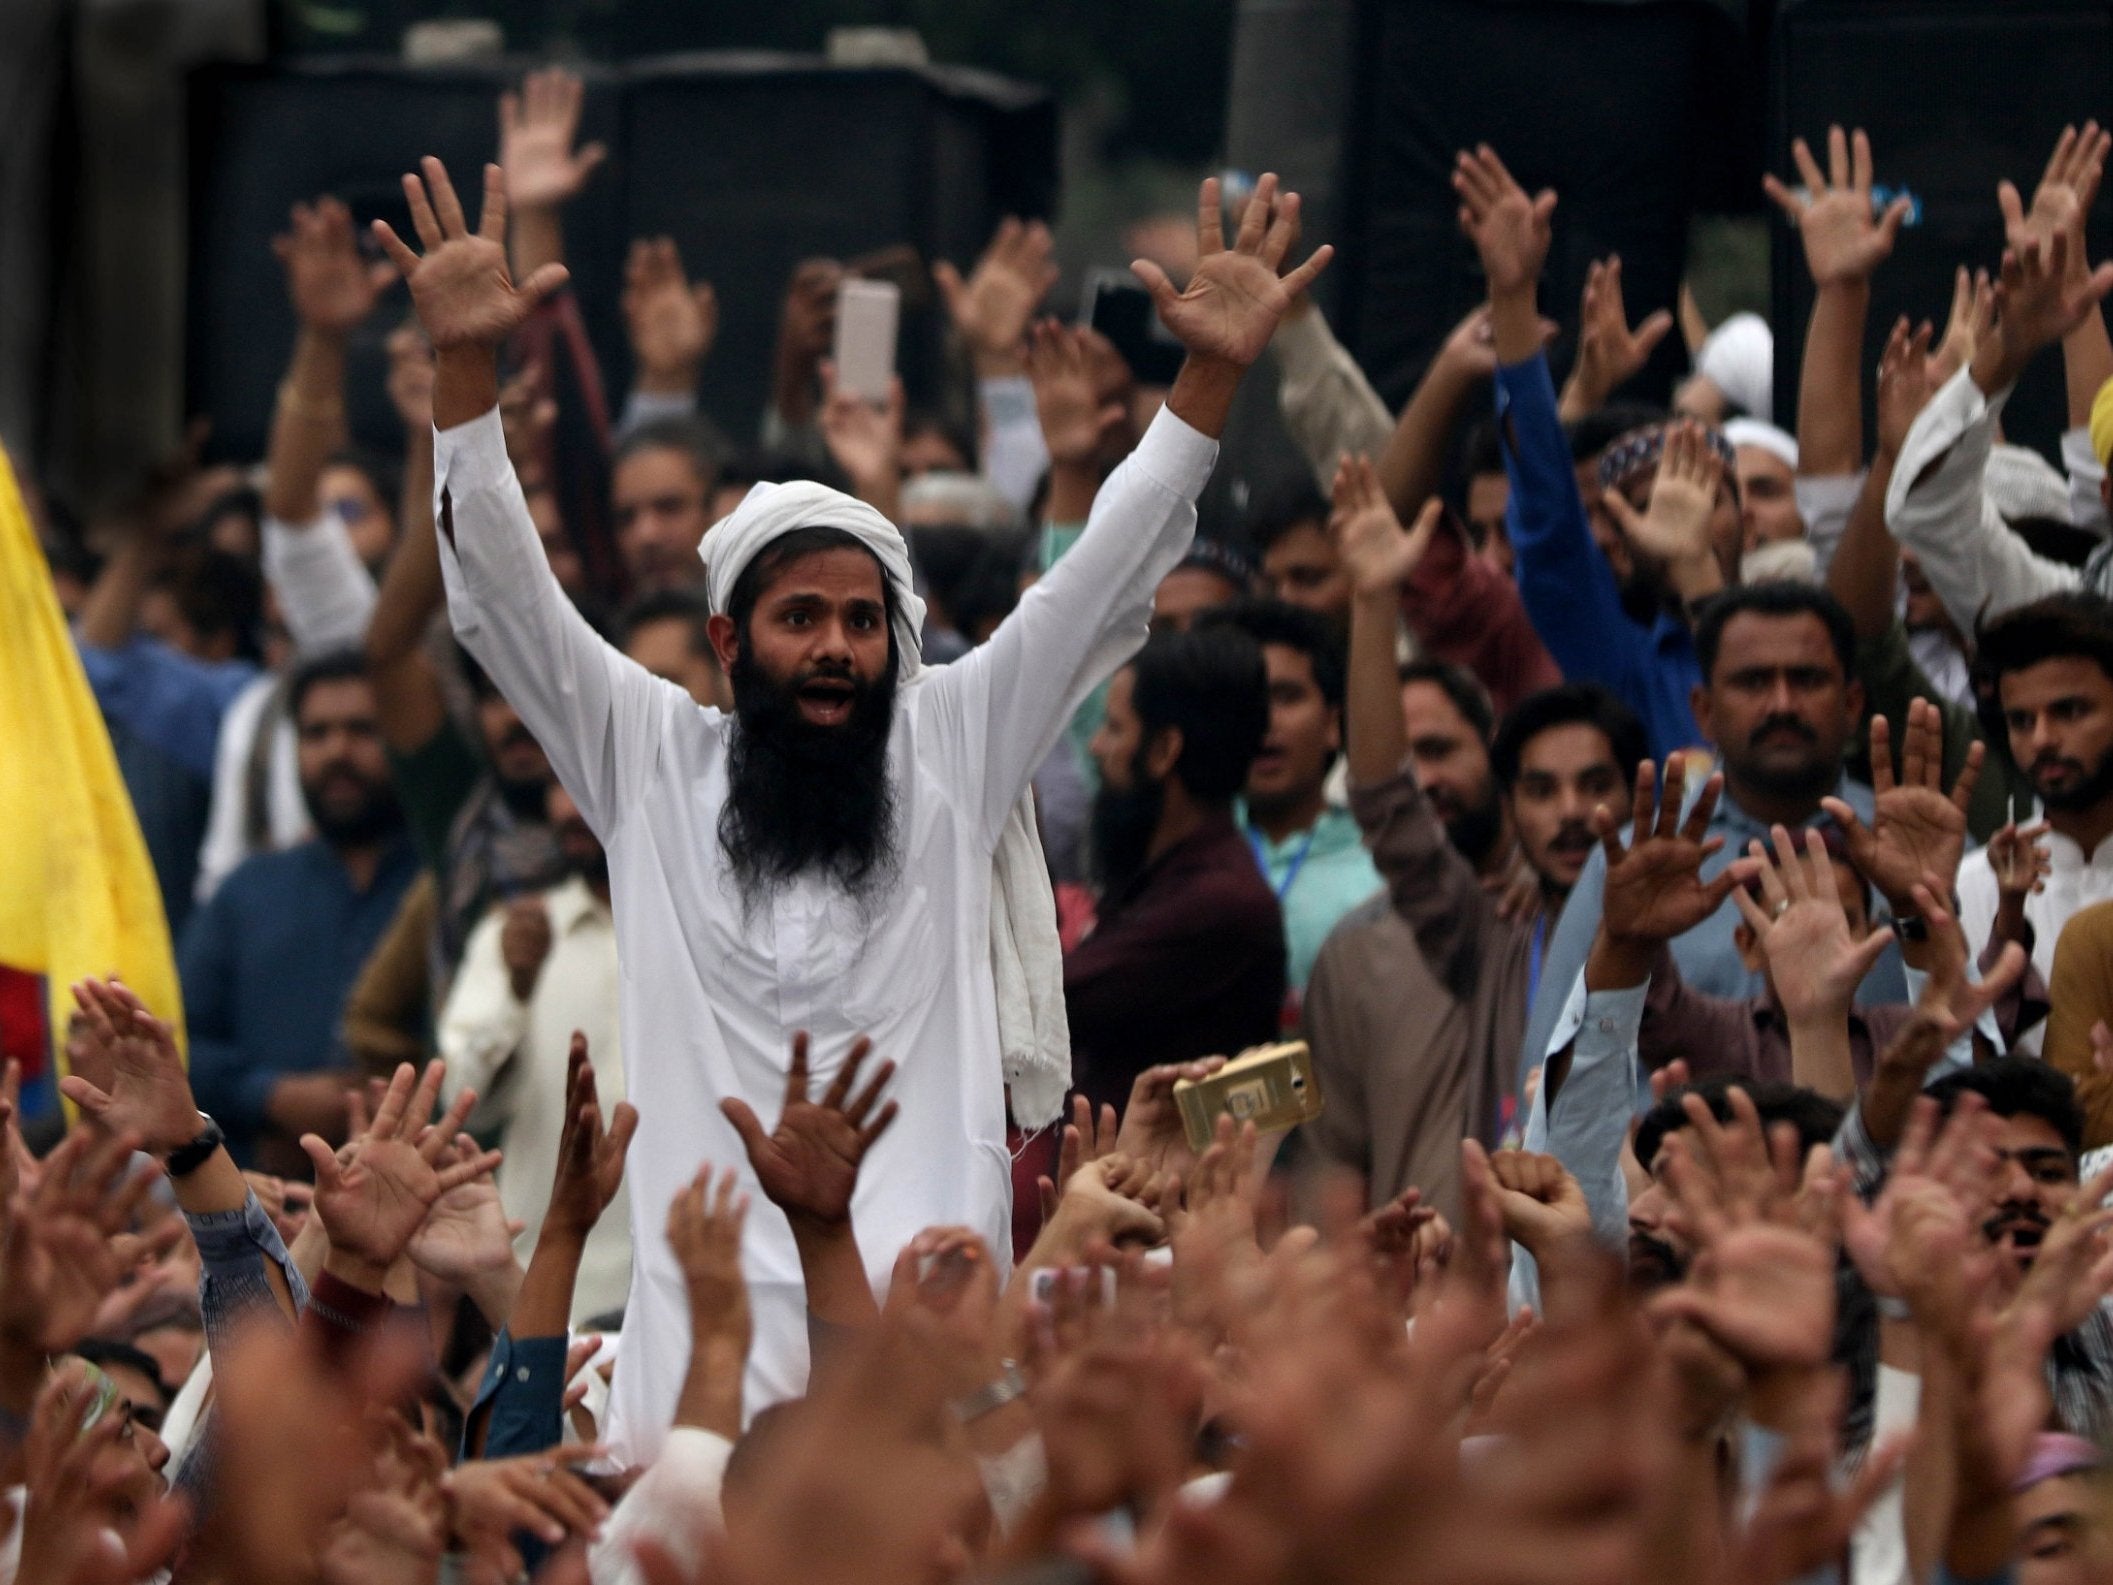 Supporters of far-right Islamist party?TLP party protest at the acquittal of Asia Bibi